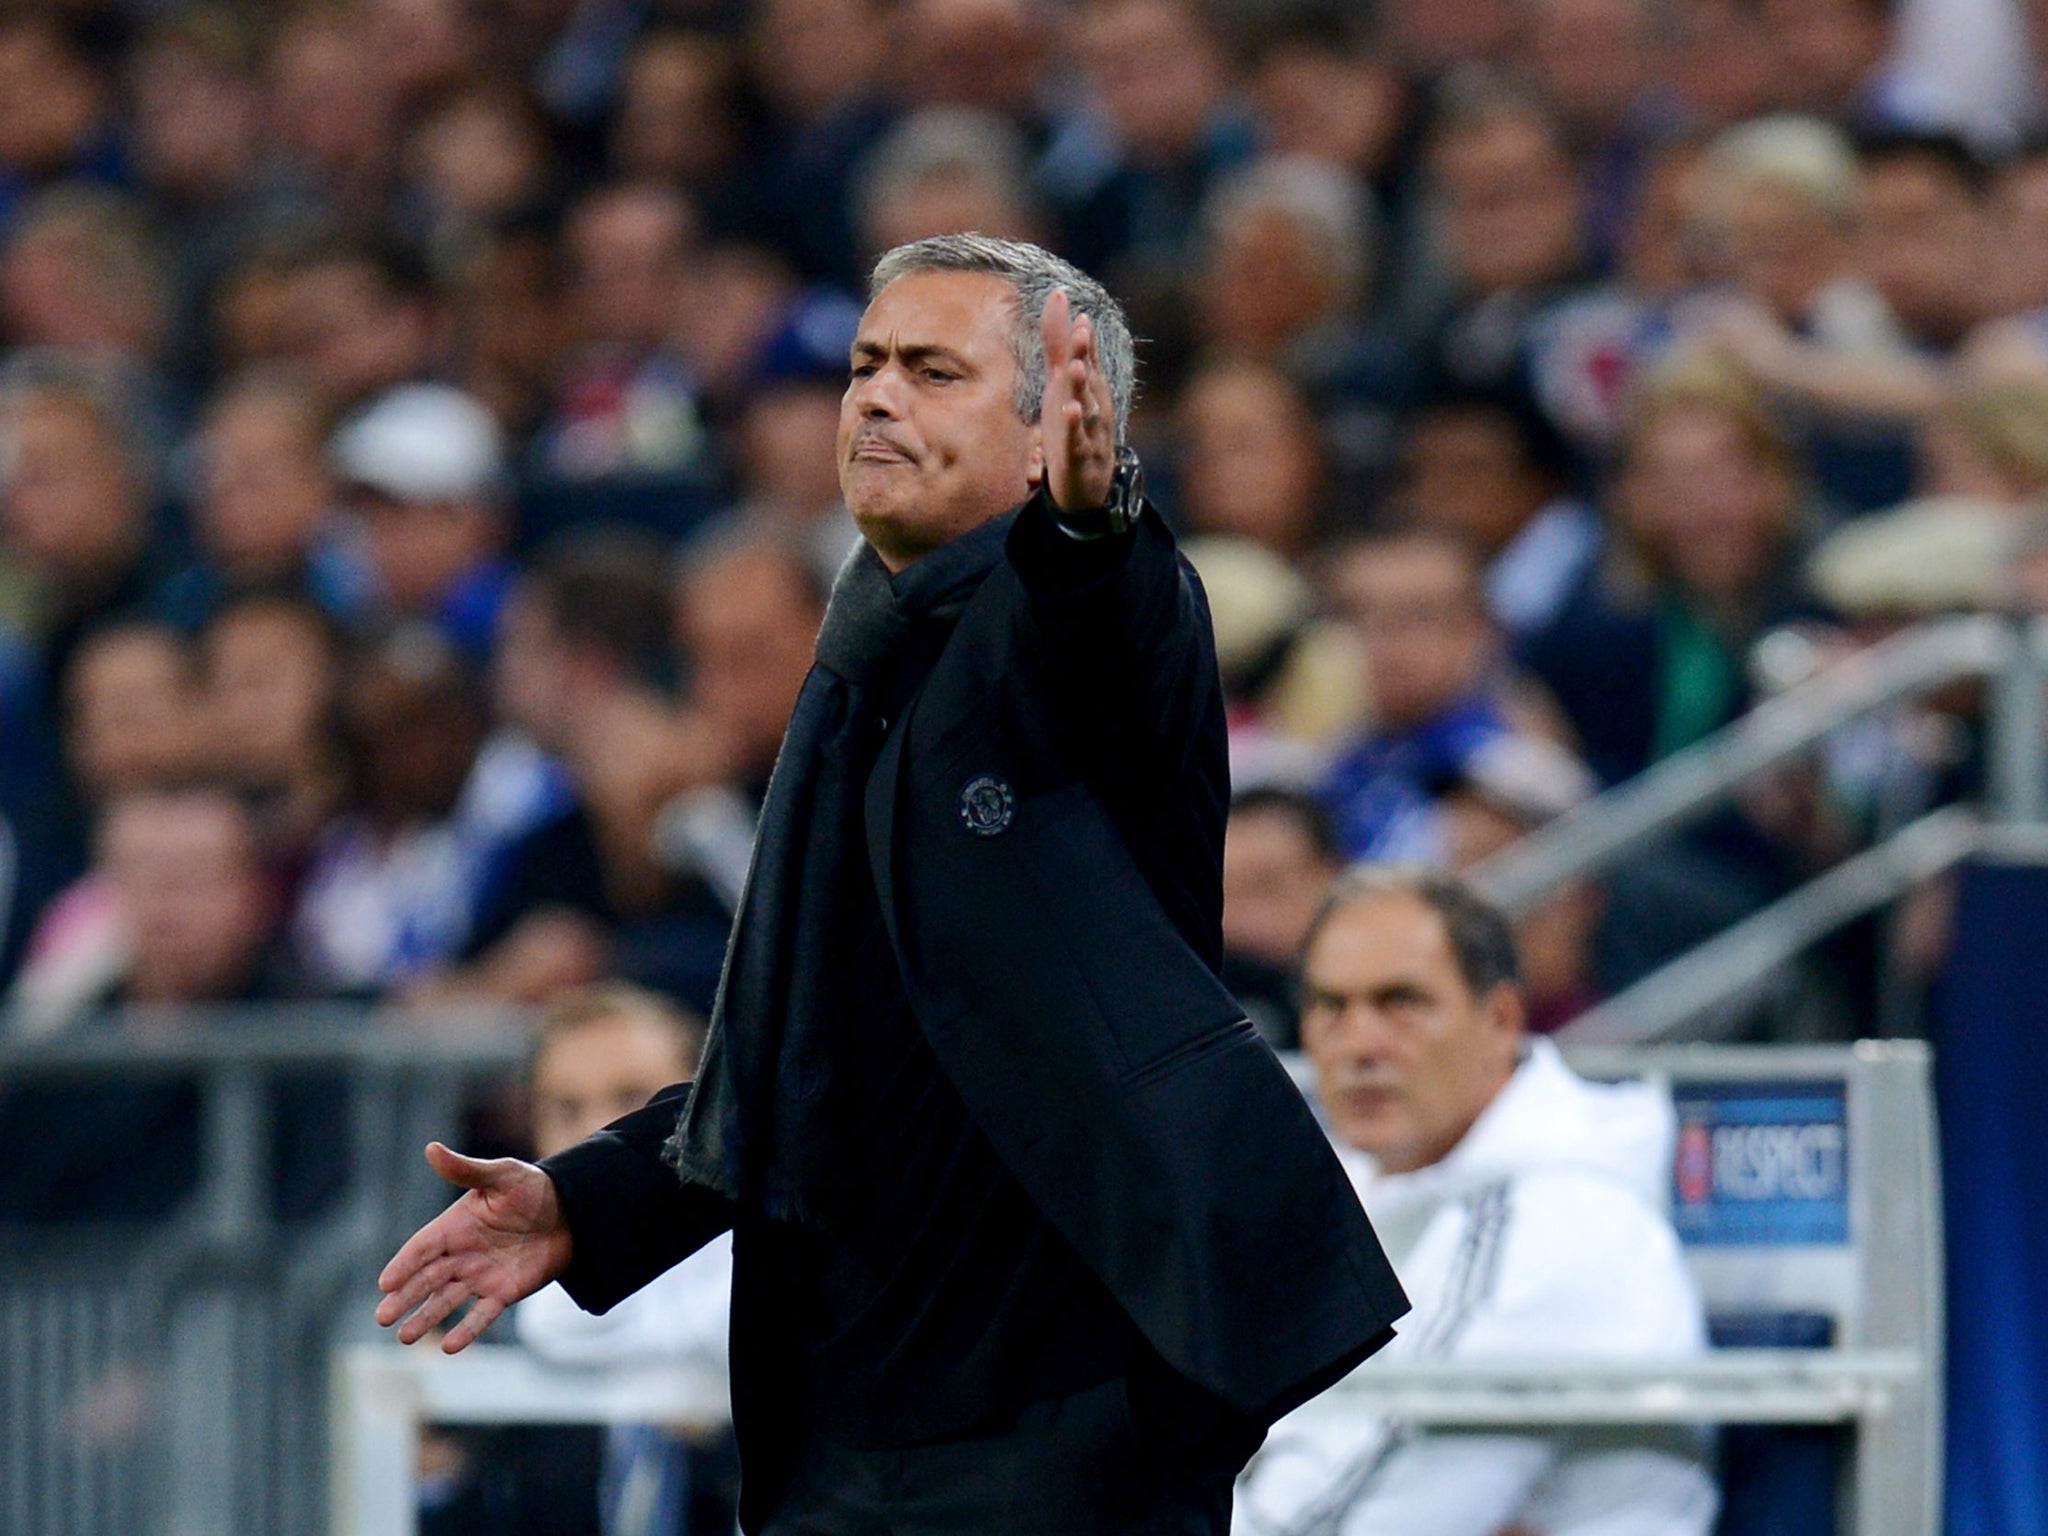 Jose Mourinho was pleased with Chelsea's win over Schalke, despite looking particularly unimpressed on the sidelines